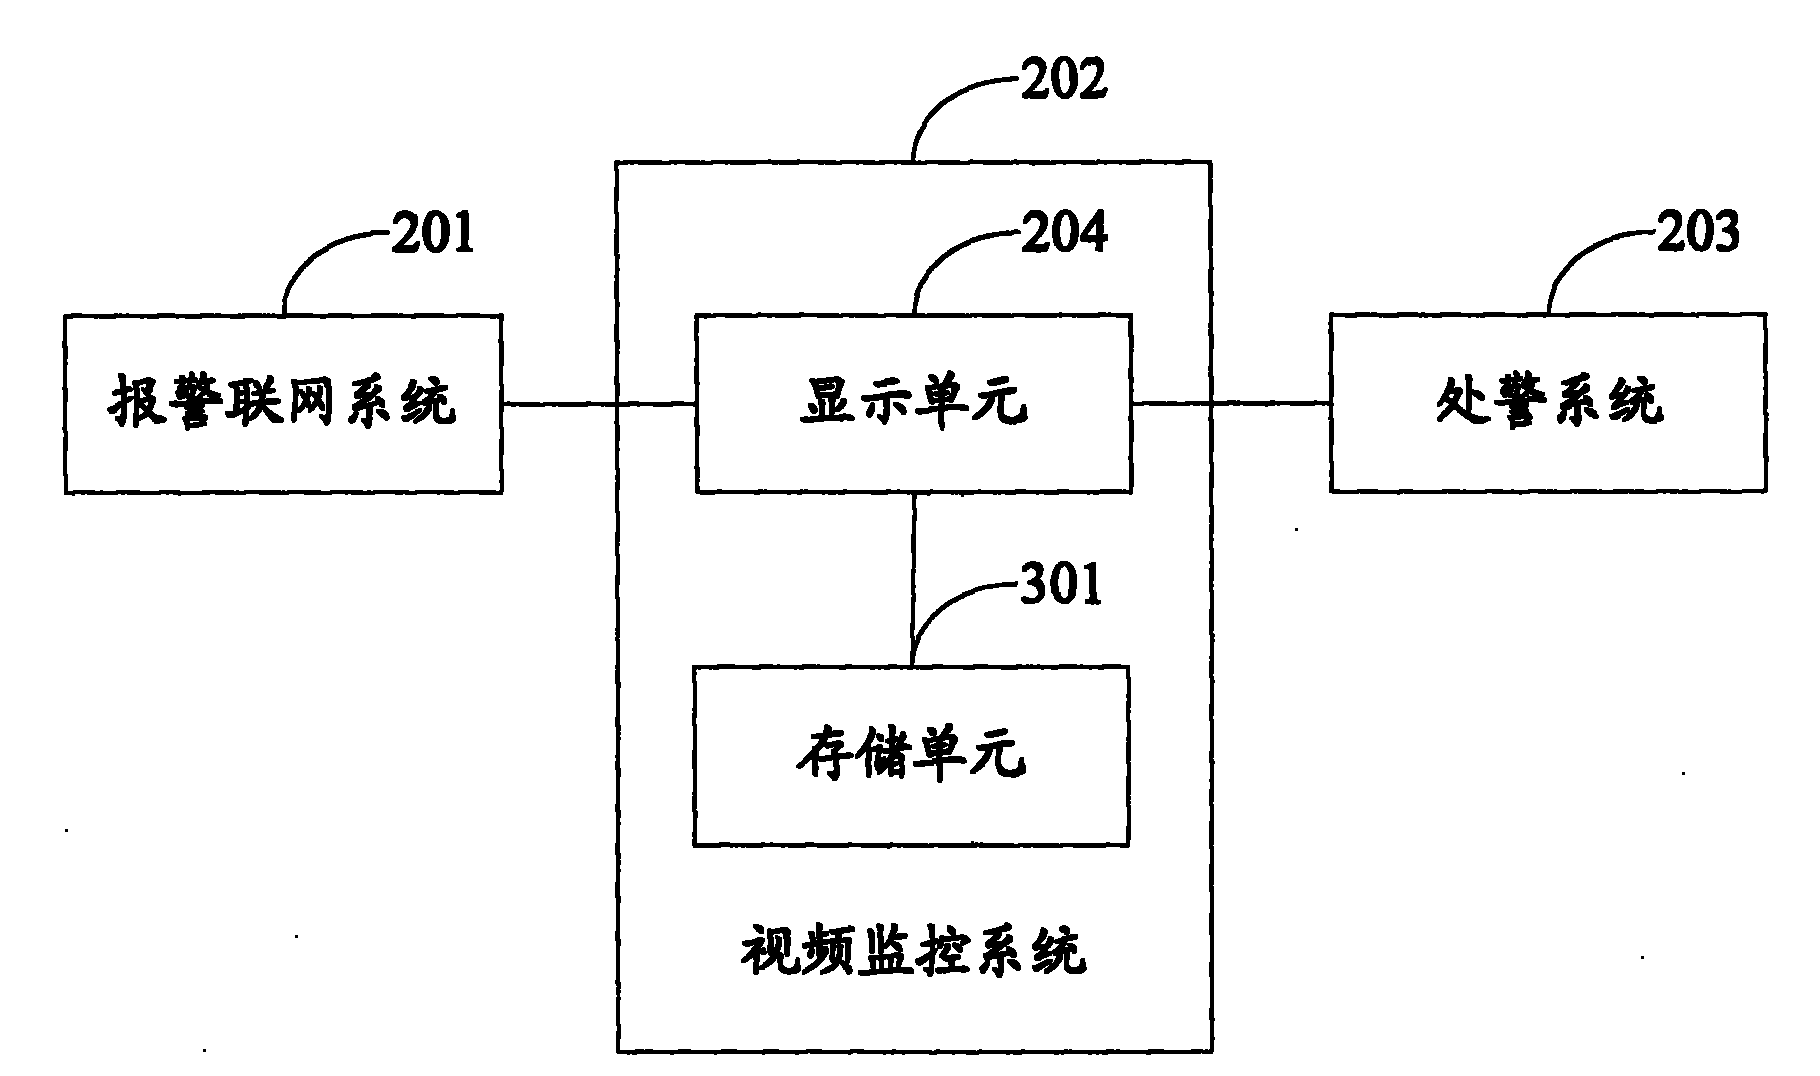 Video monitoring networking management method, device and system